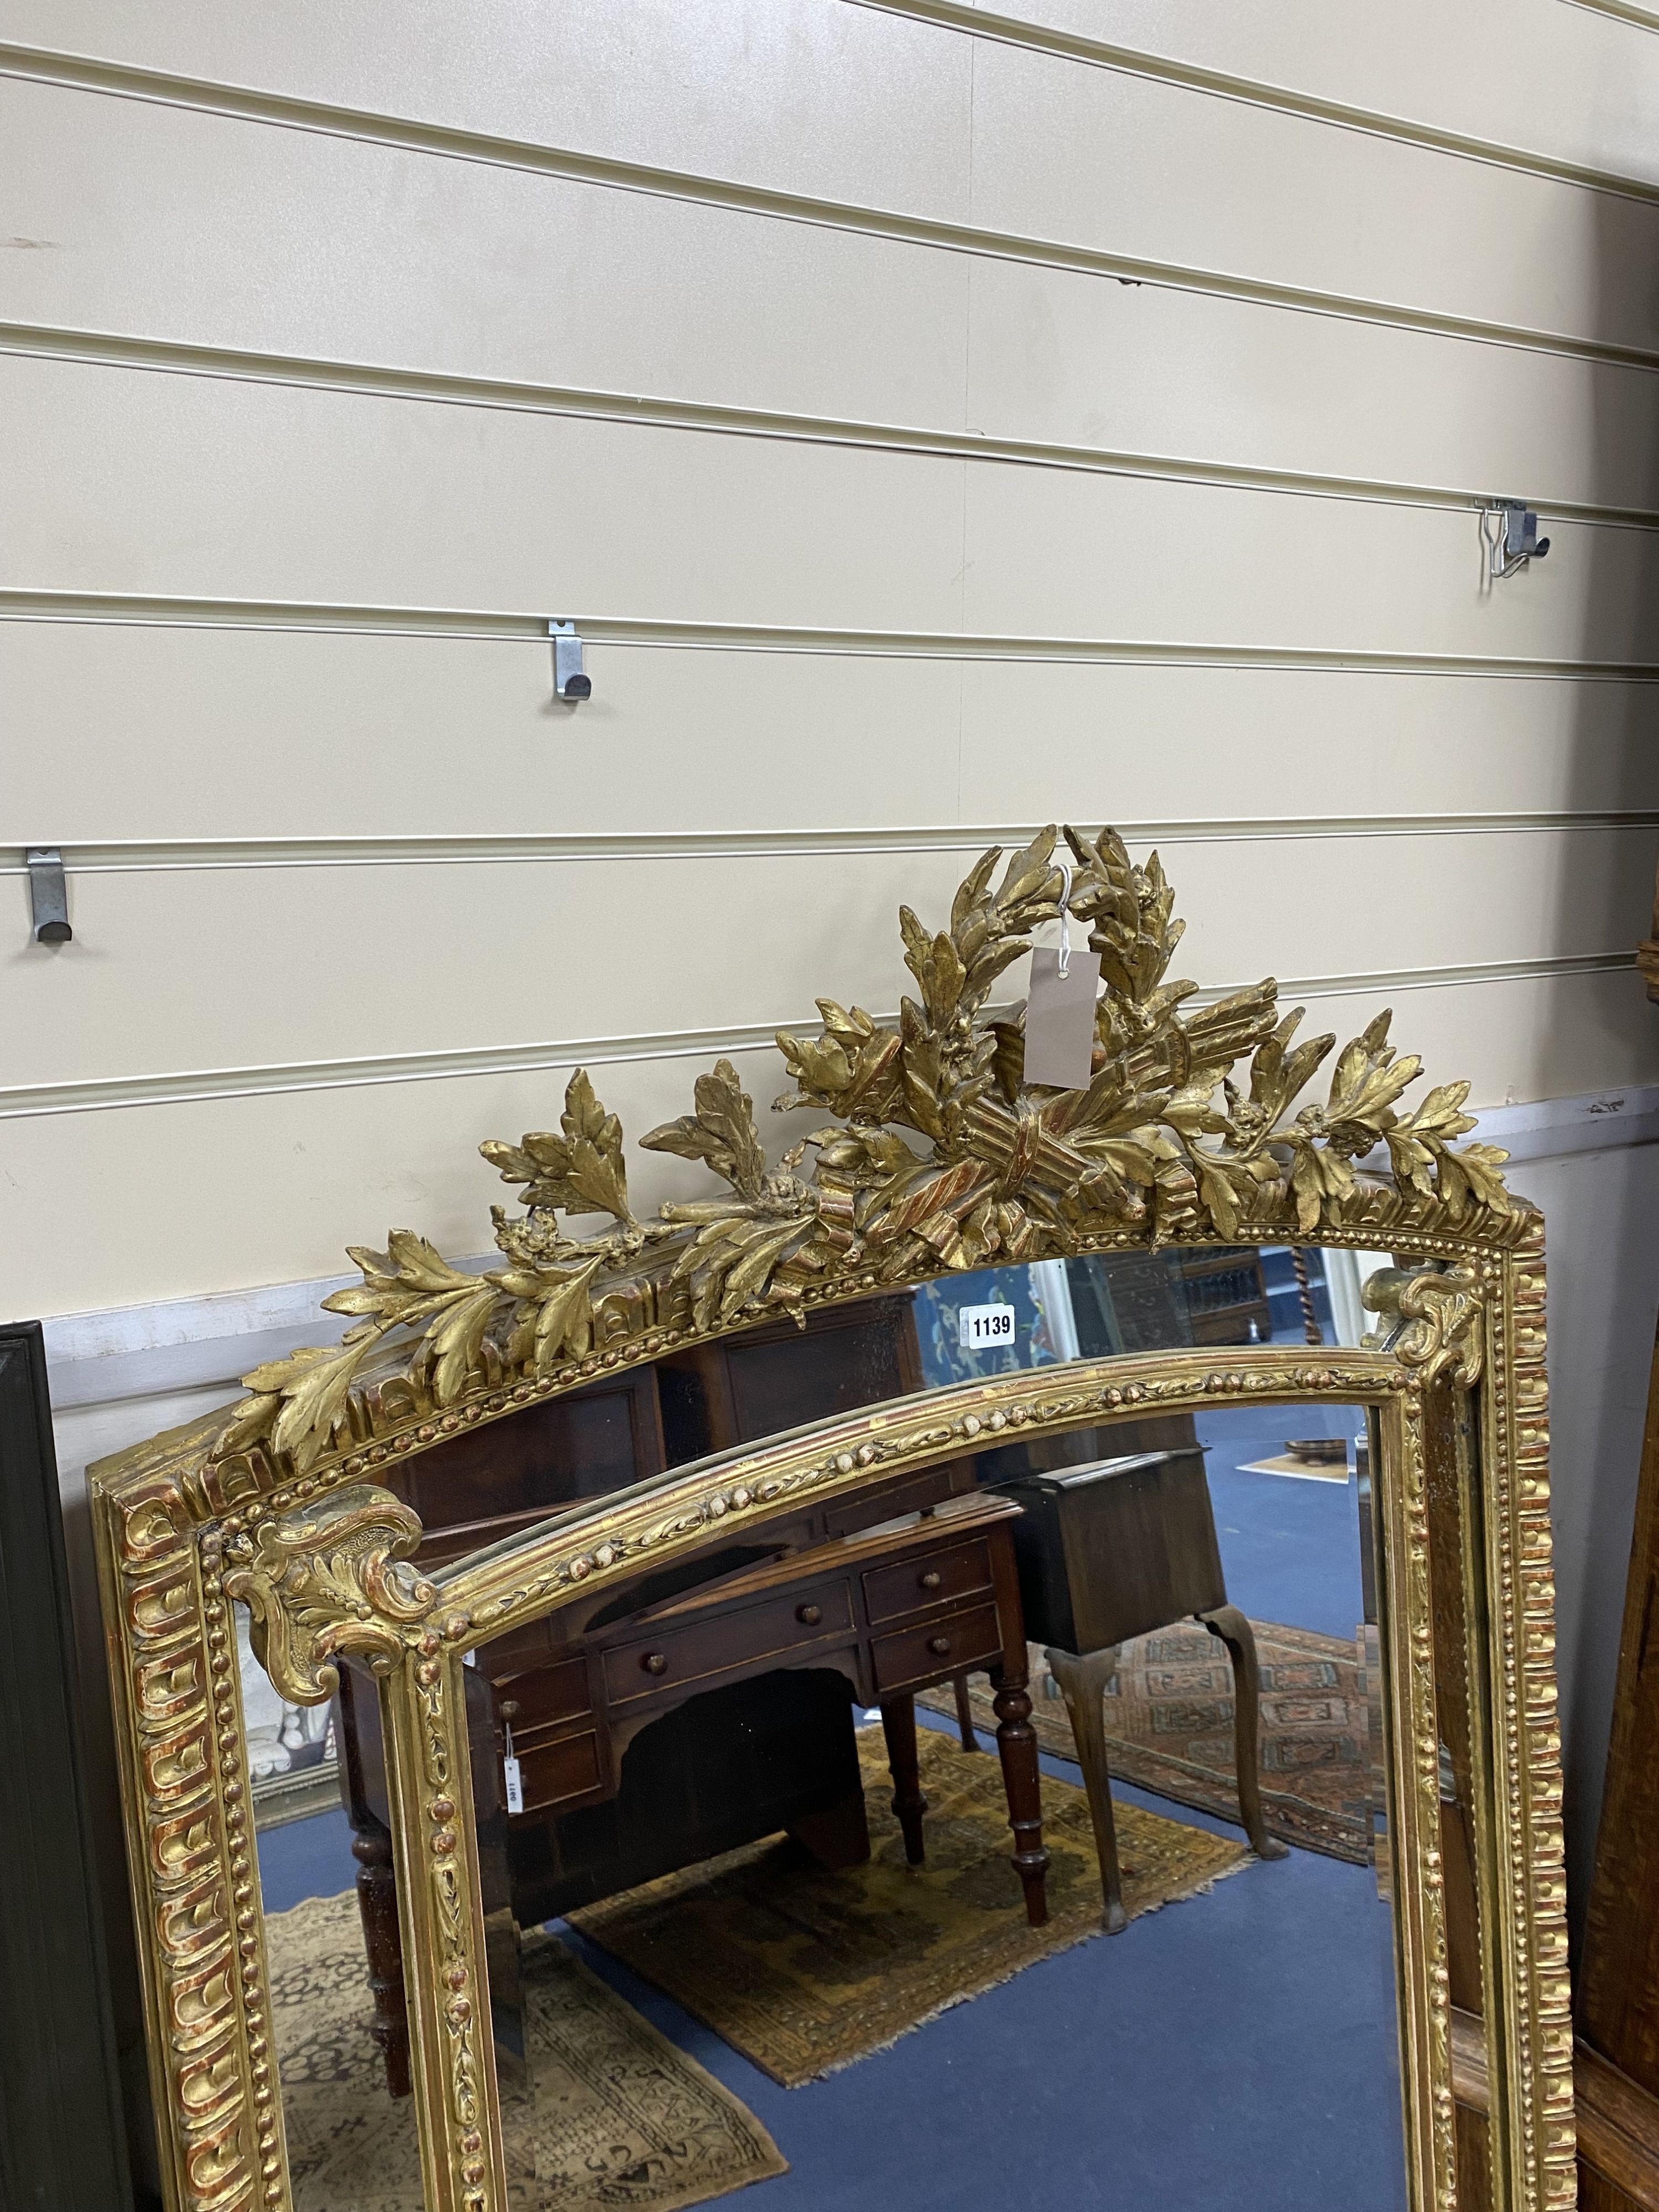 A 19th century giltwood and gesso overmantel mirror with Olympic Torch & Laurel Crown, side cushions with decorated bead detail, width 92cm, height 153cm